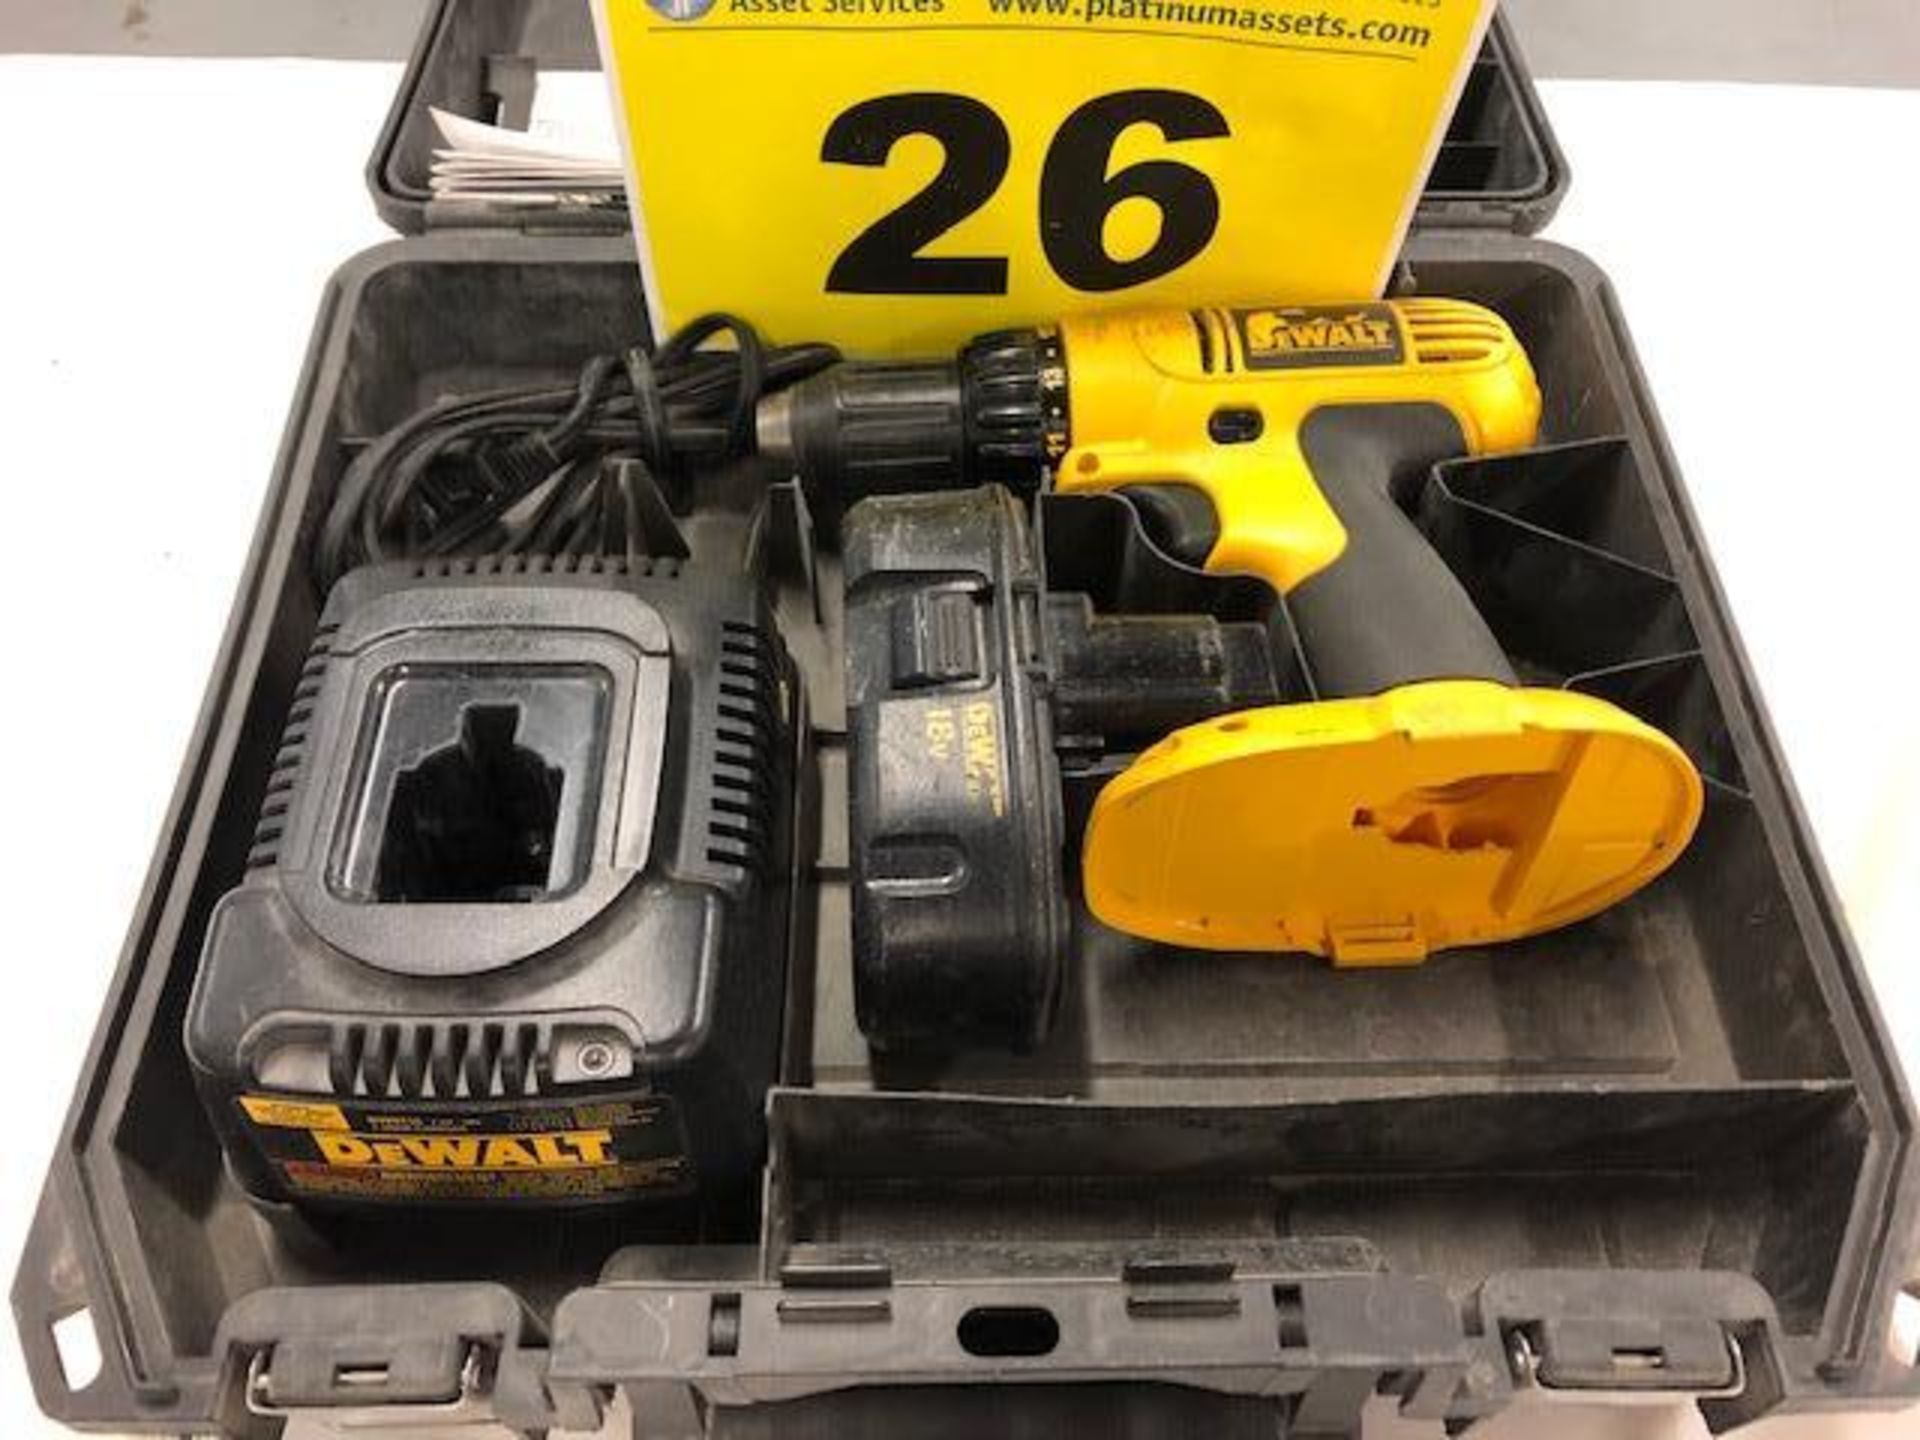 DEWALT, DC759 18V BATTERY POWERED DRILL WITH CHARGER